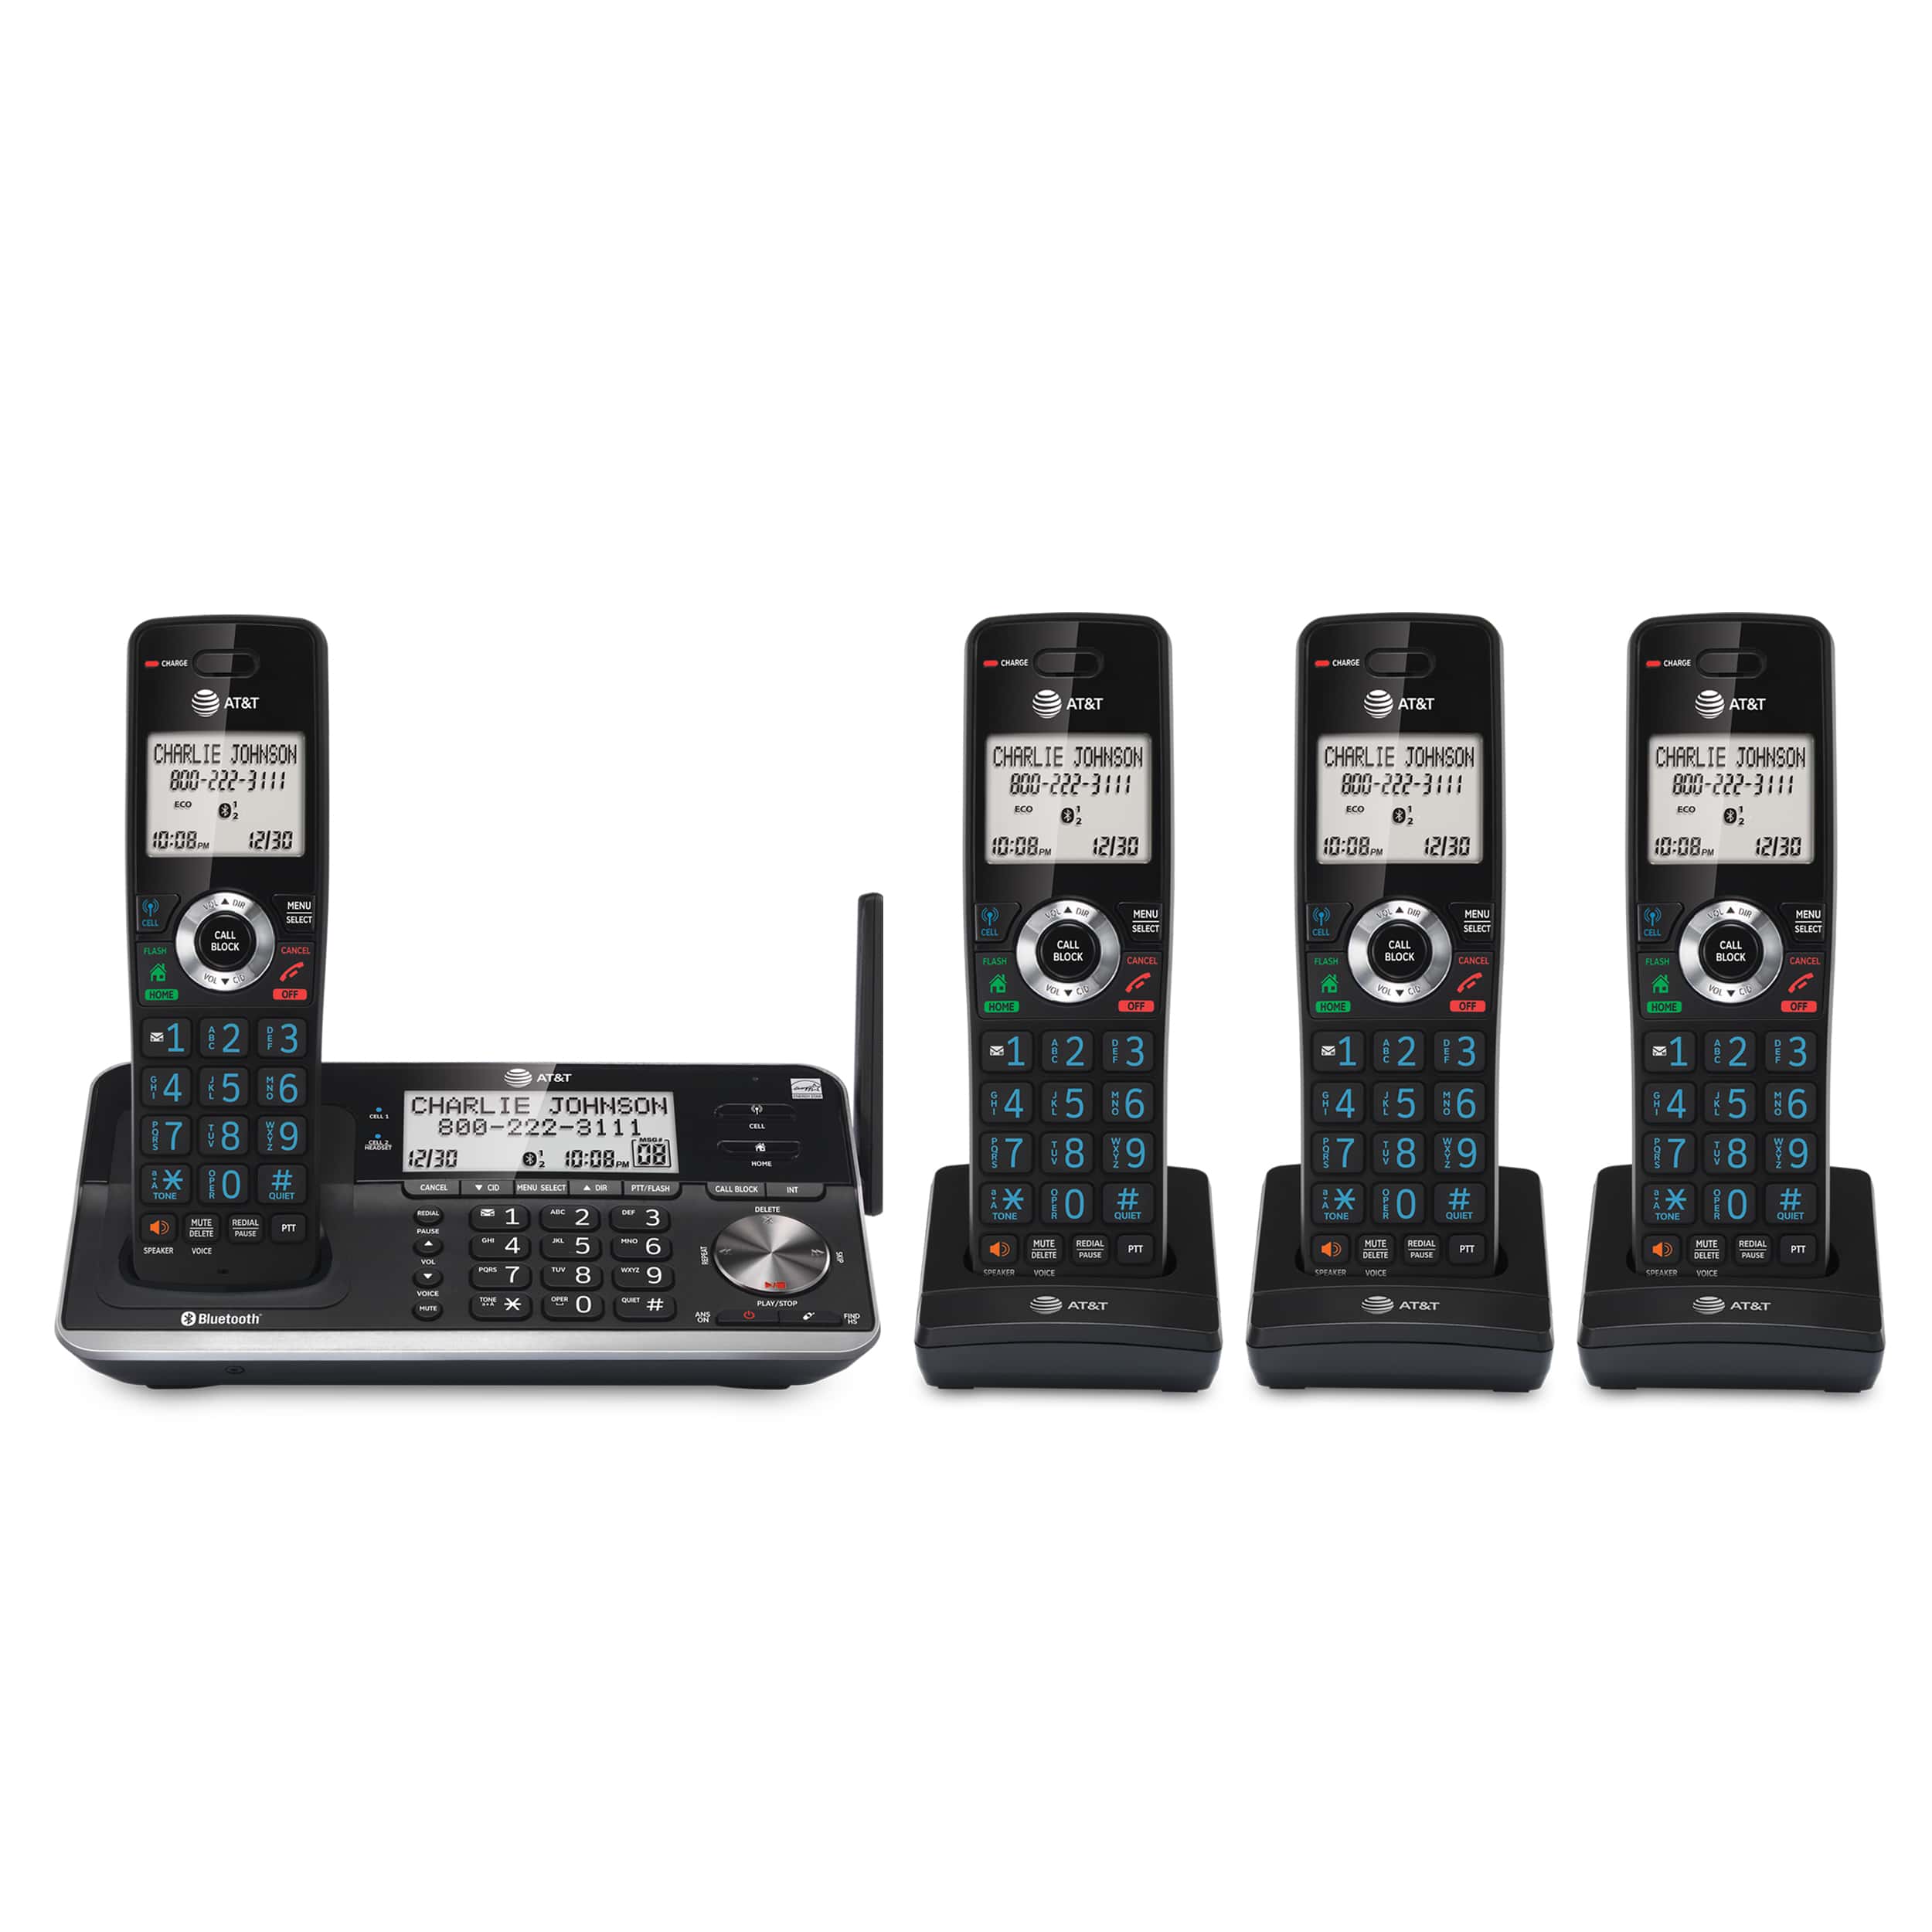 4-Handset Expandable Cordless Phone with Unsurpassed Range, Bluetooth Connect to Cell™, Smart Call Blocker and Answering System - view 1